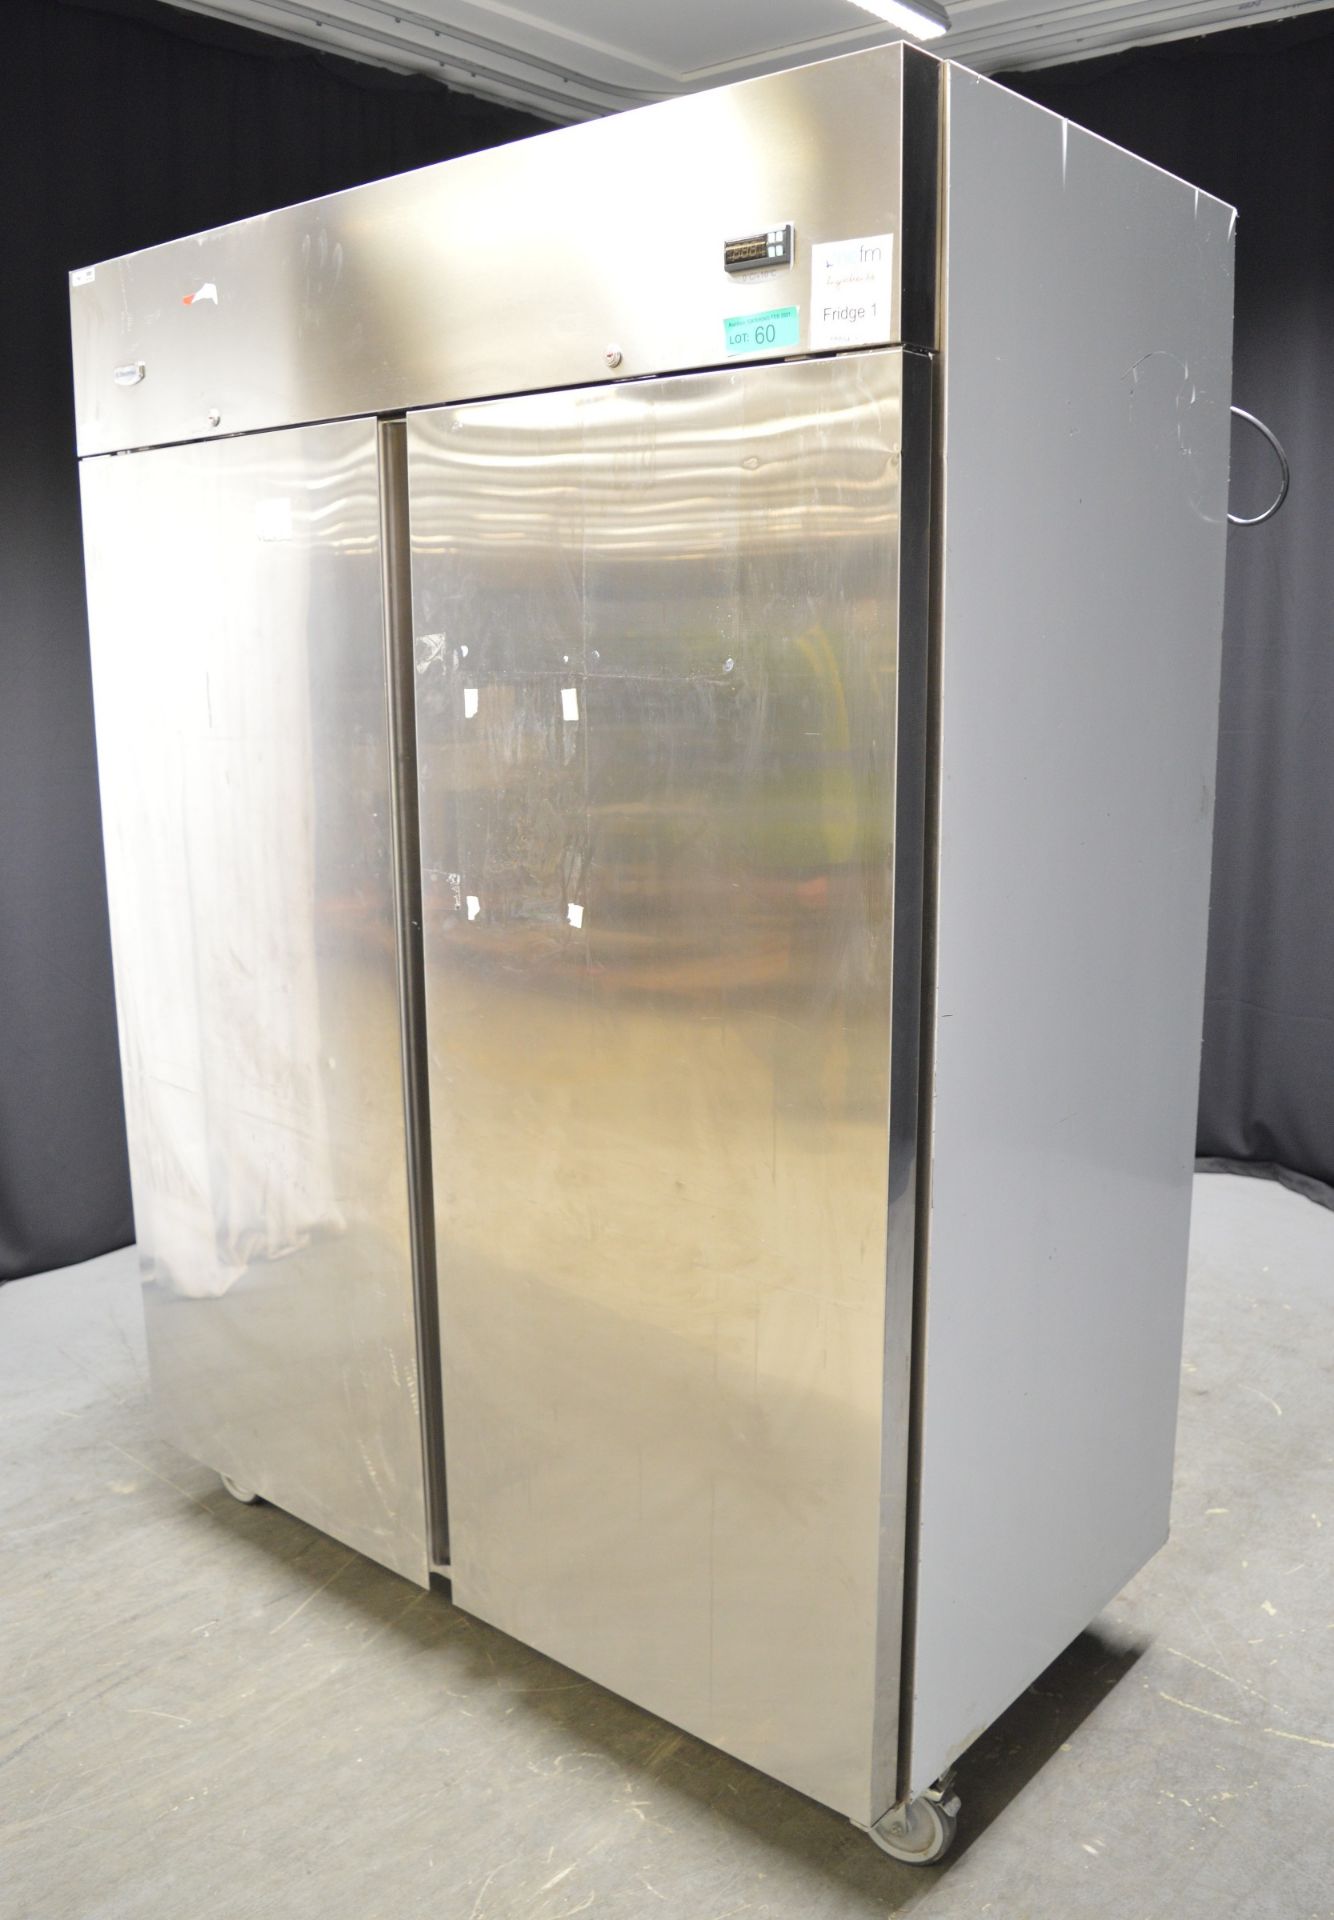 Electrolux RS13P42F Double Door Refrigerator - Image 3 of 8